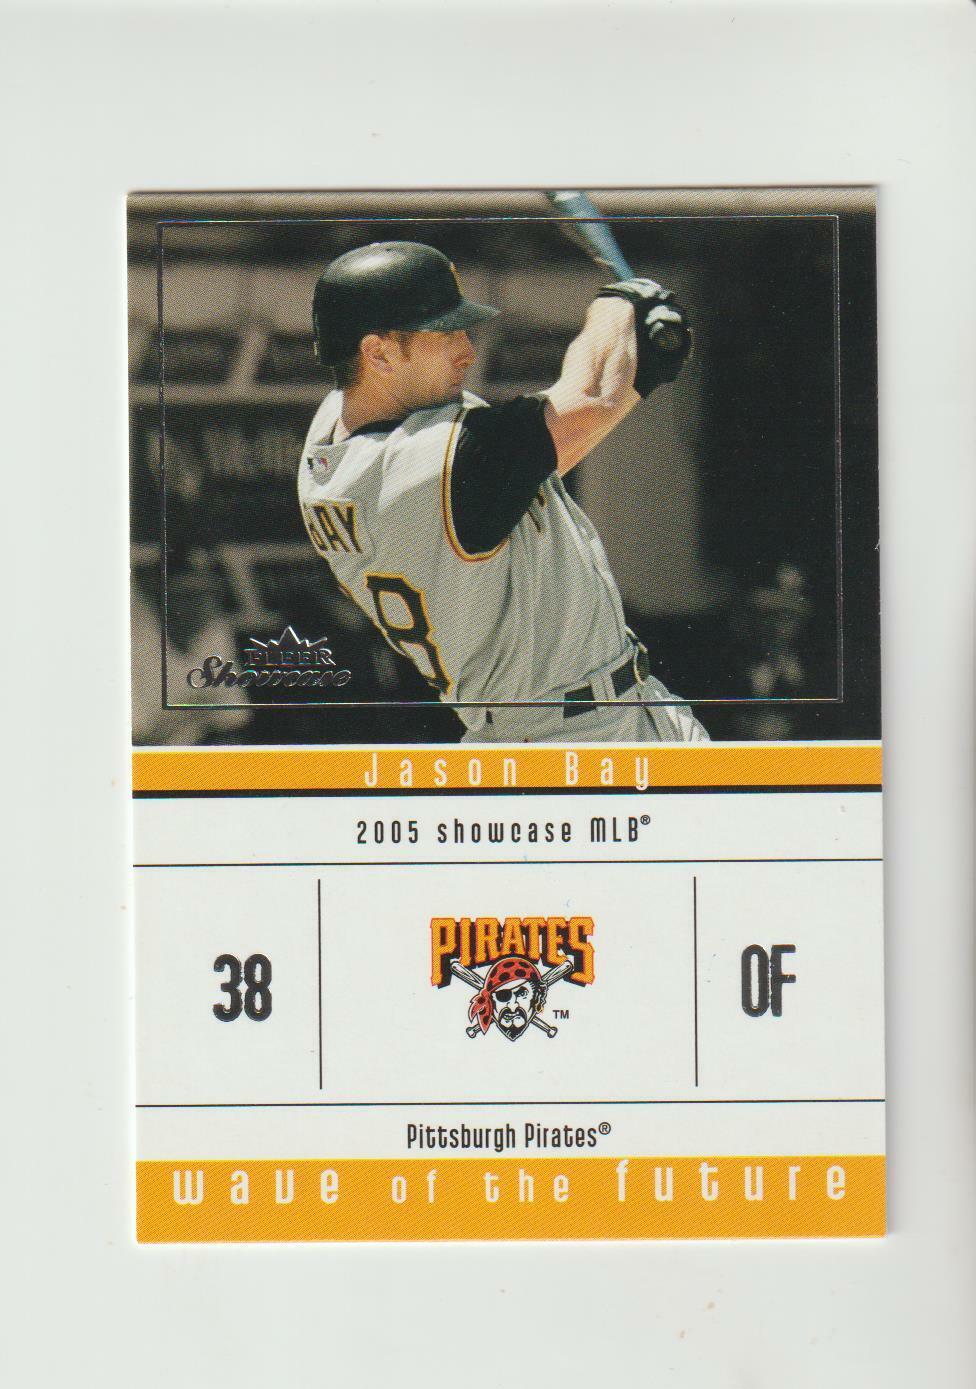 2005 Fleer Wave of the Future #7 Jason Bay rookie card, Pittsburgh Pirates star. rookie card picture